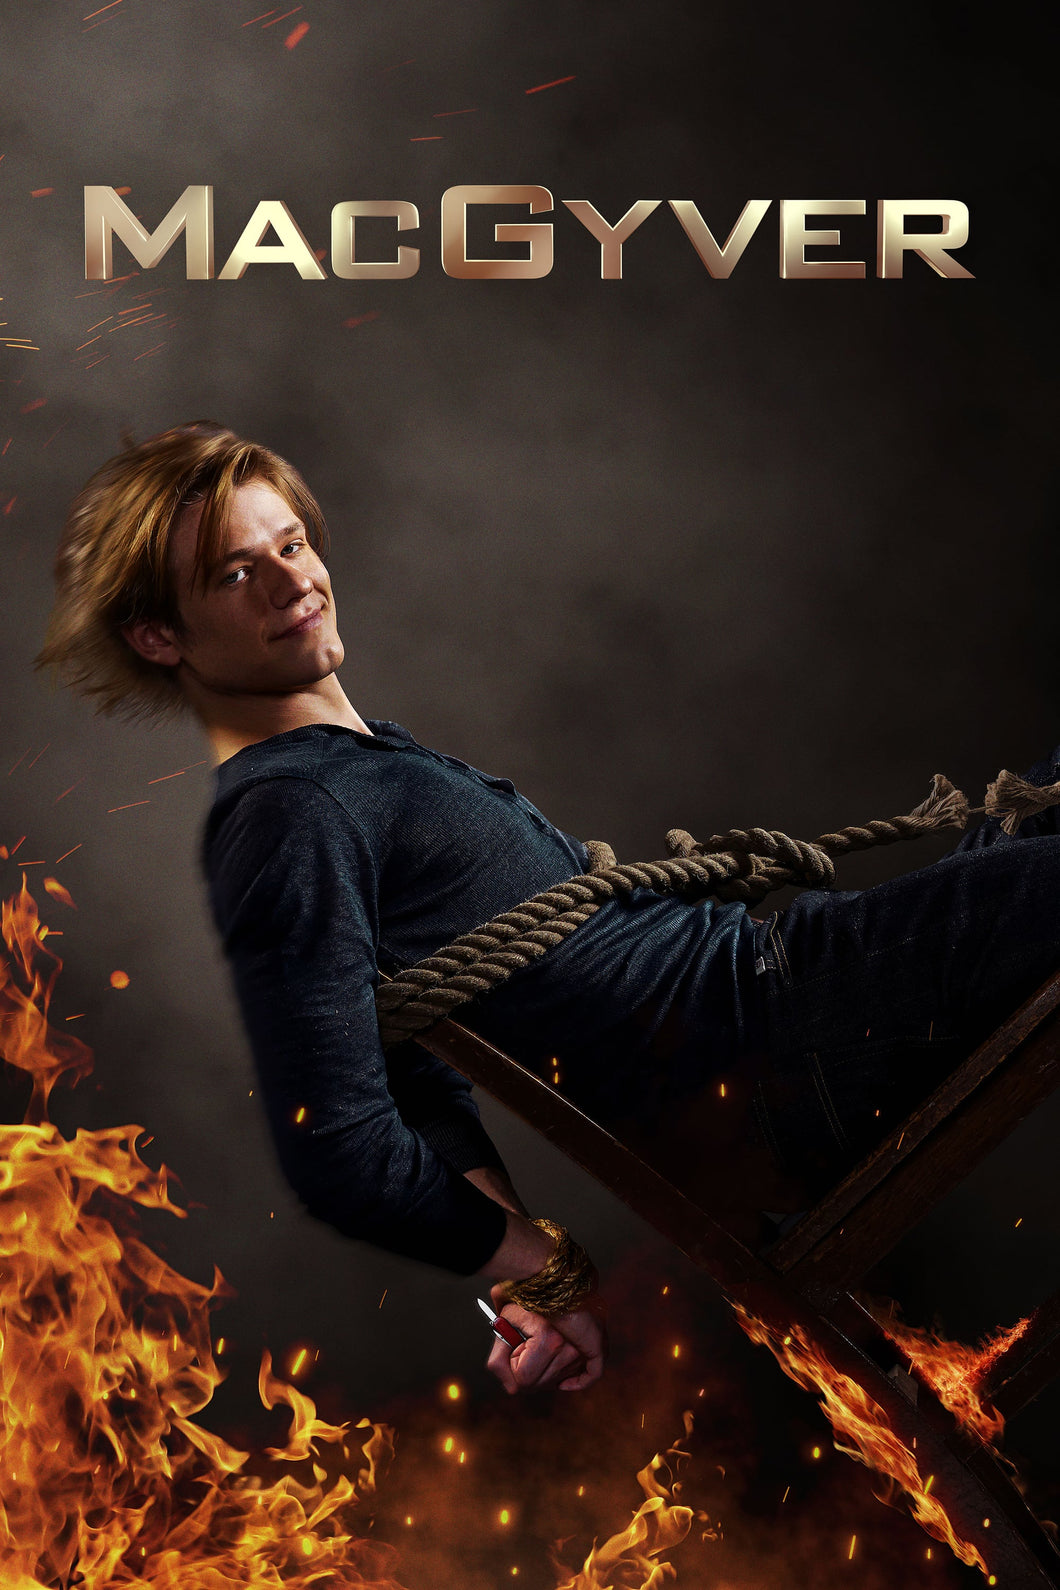 MacGyver v2 TV Series High Quality Glossy Paper A1 A2 A3 A4 A3 Framed or Unframed!!!